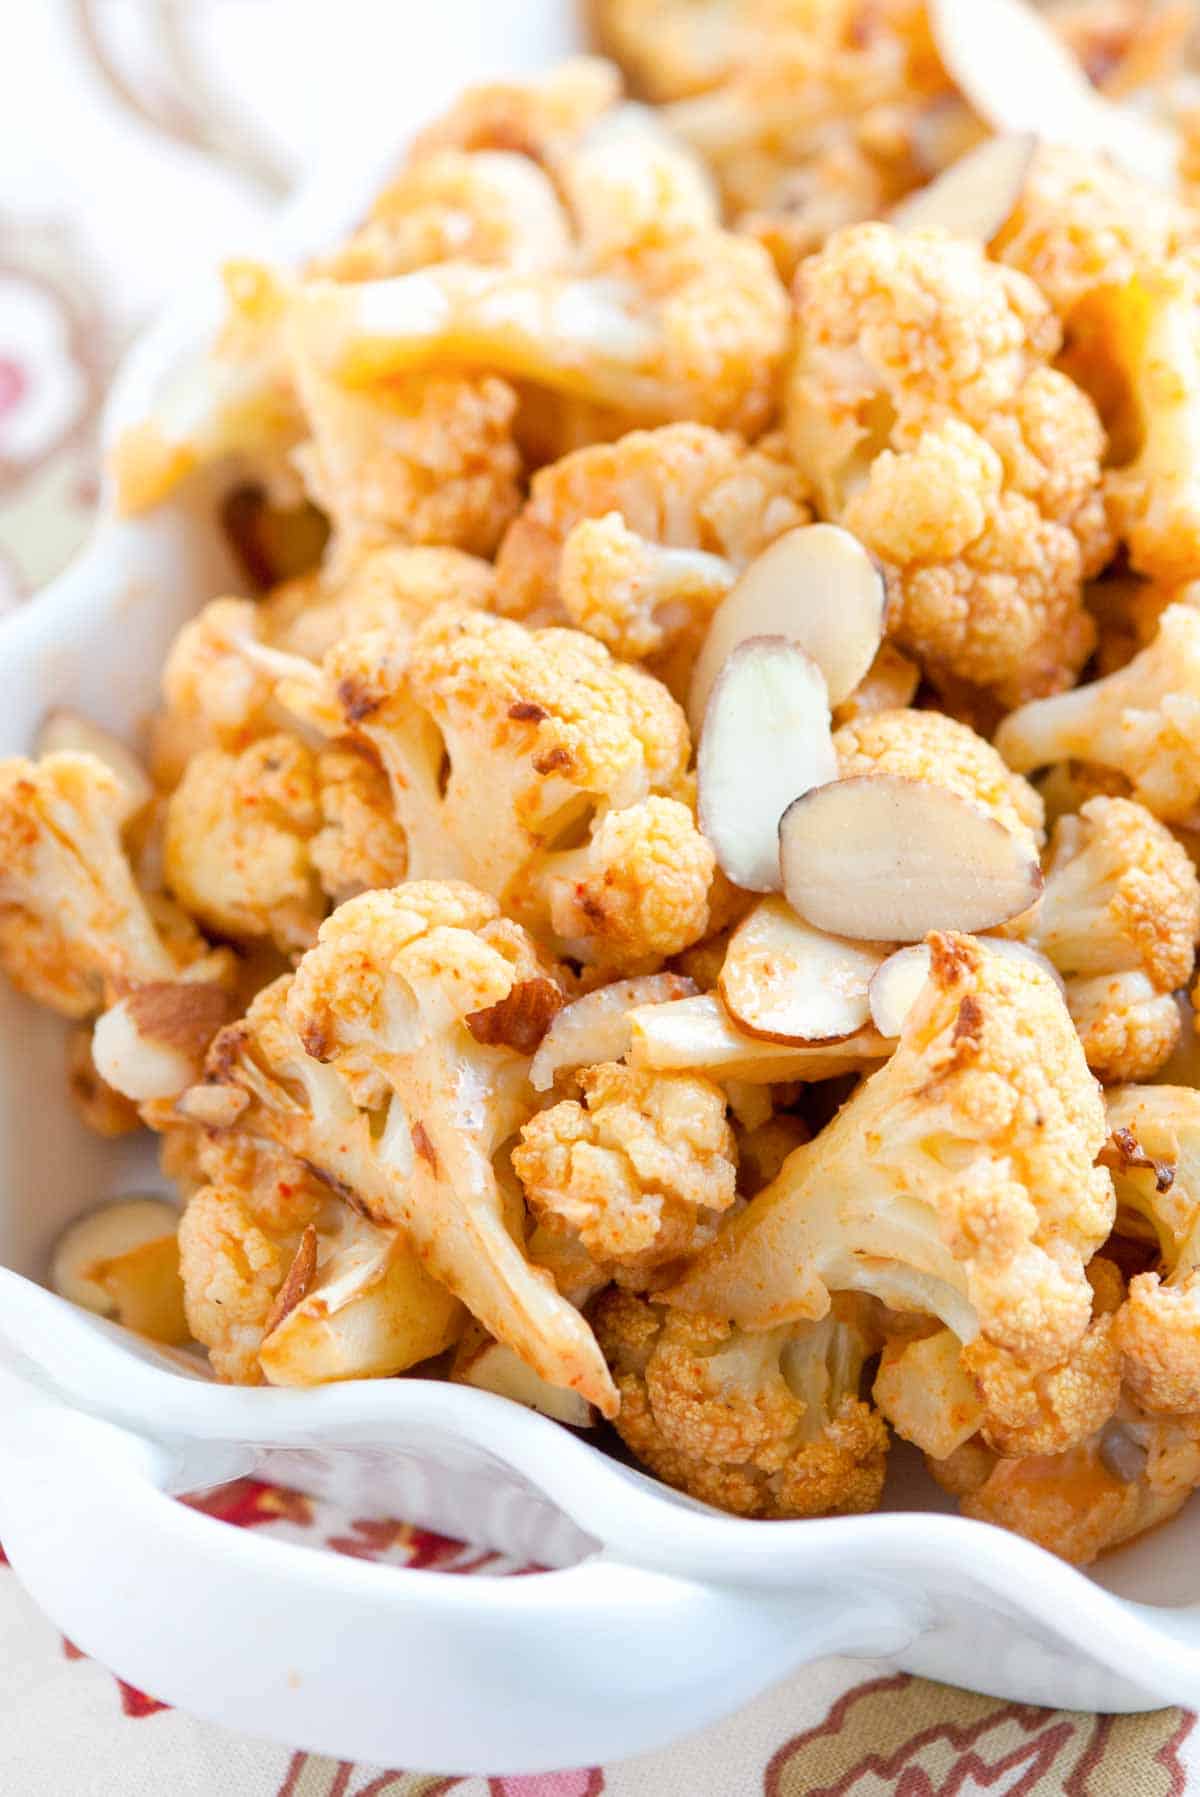 Baked Cauliflower tossed with Red Curry and Coconut